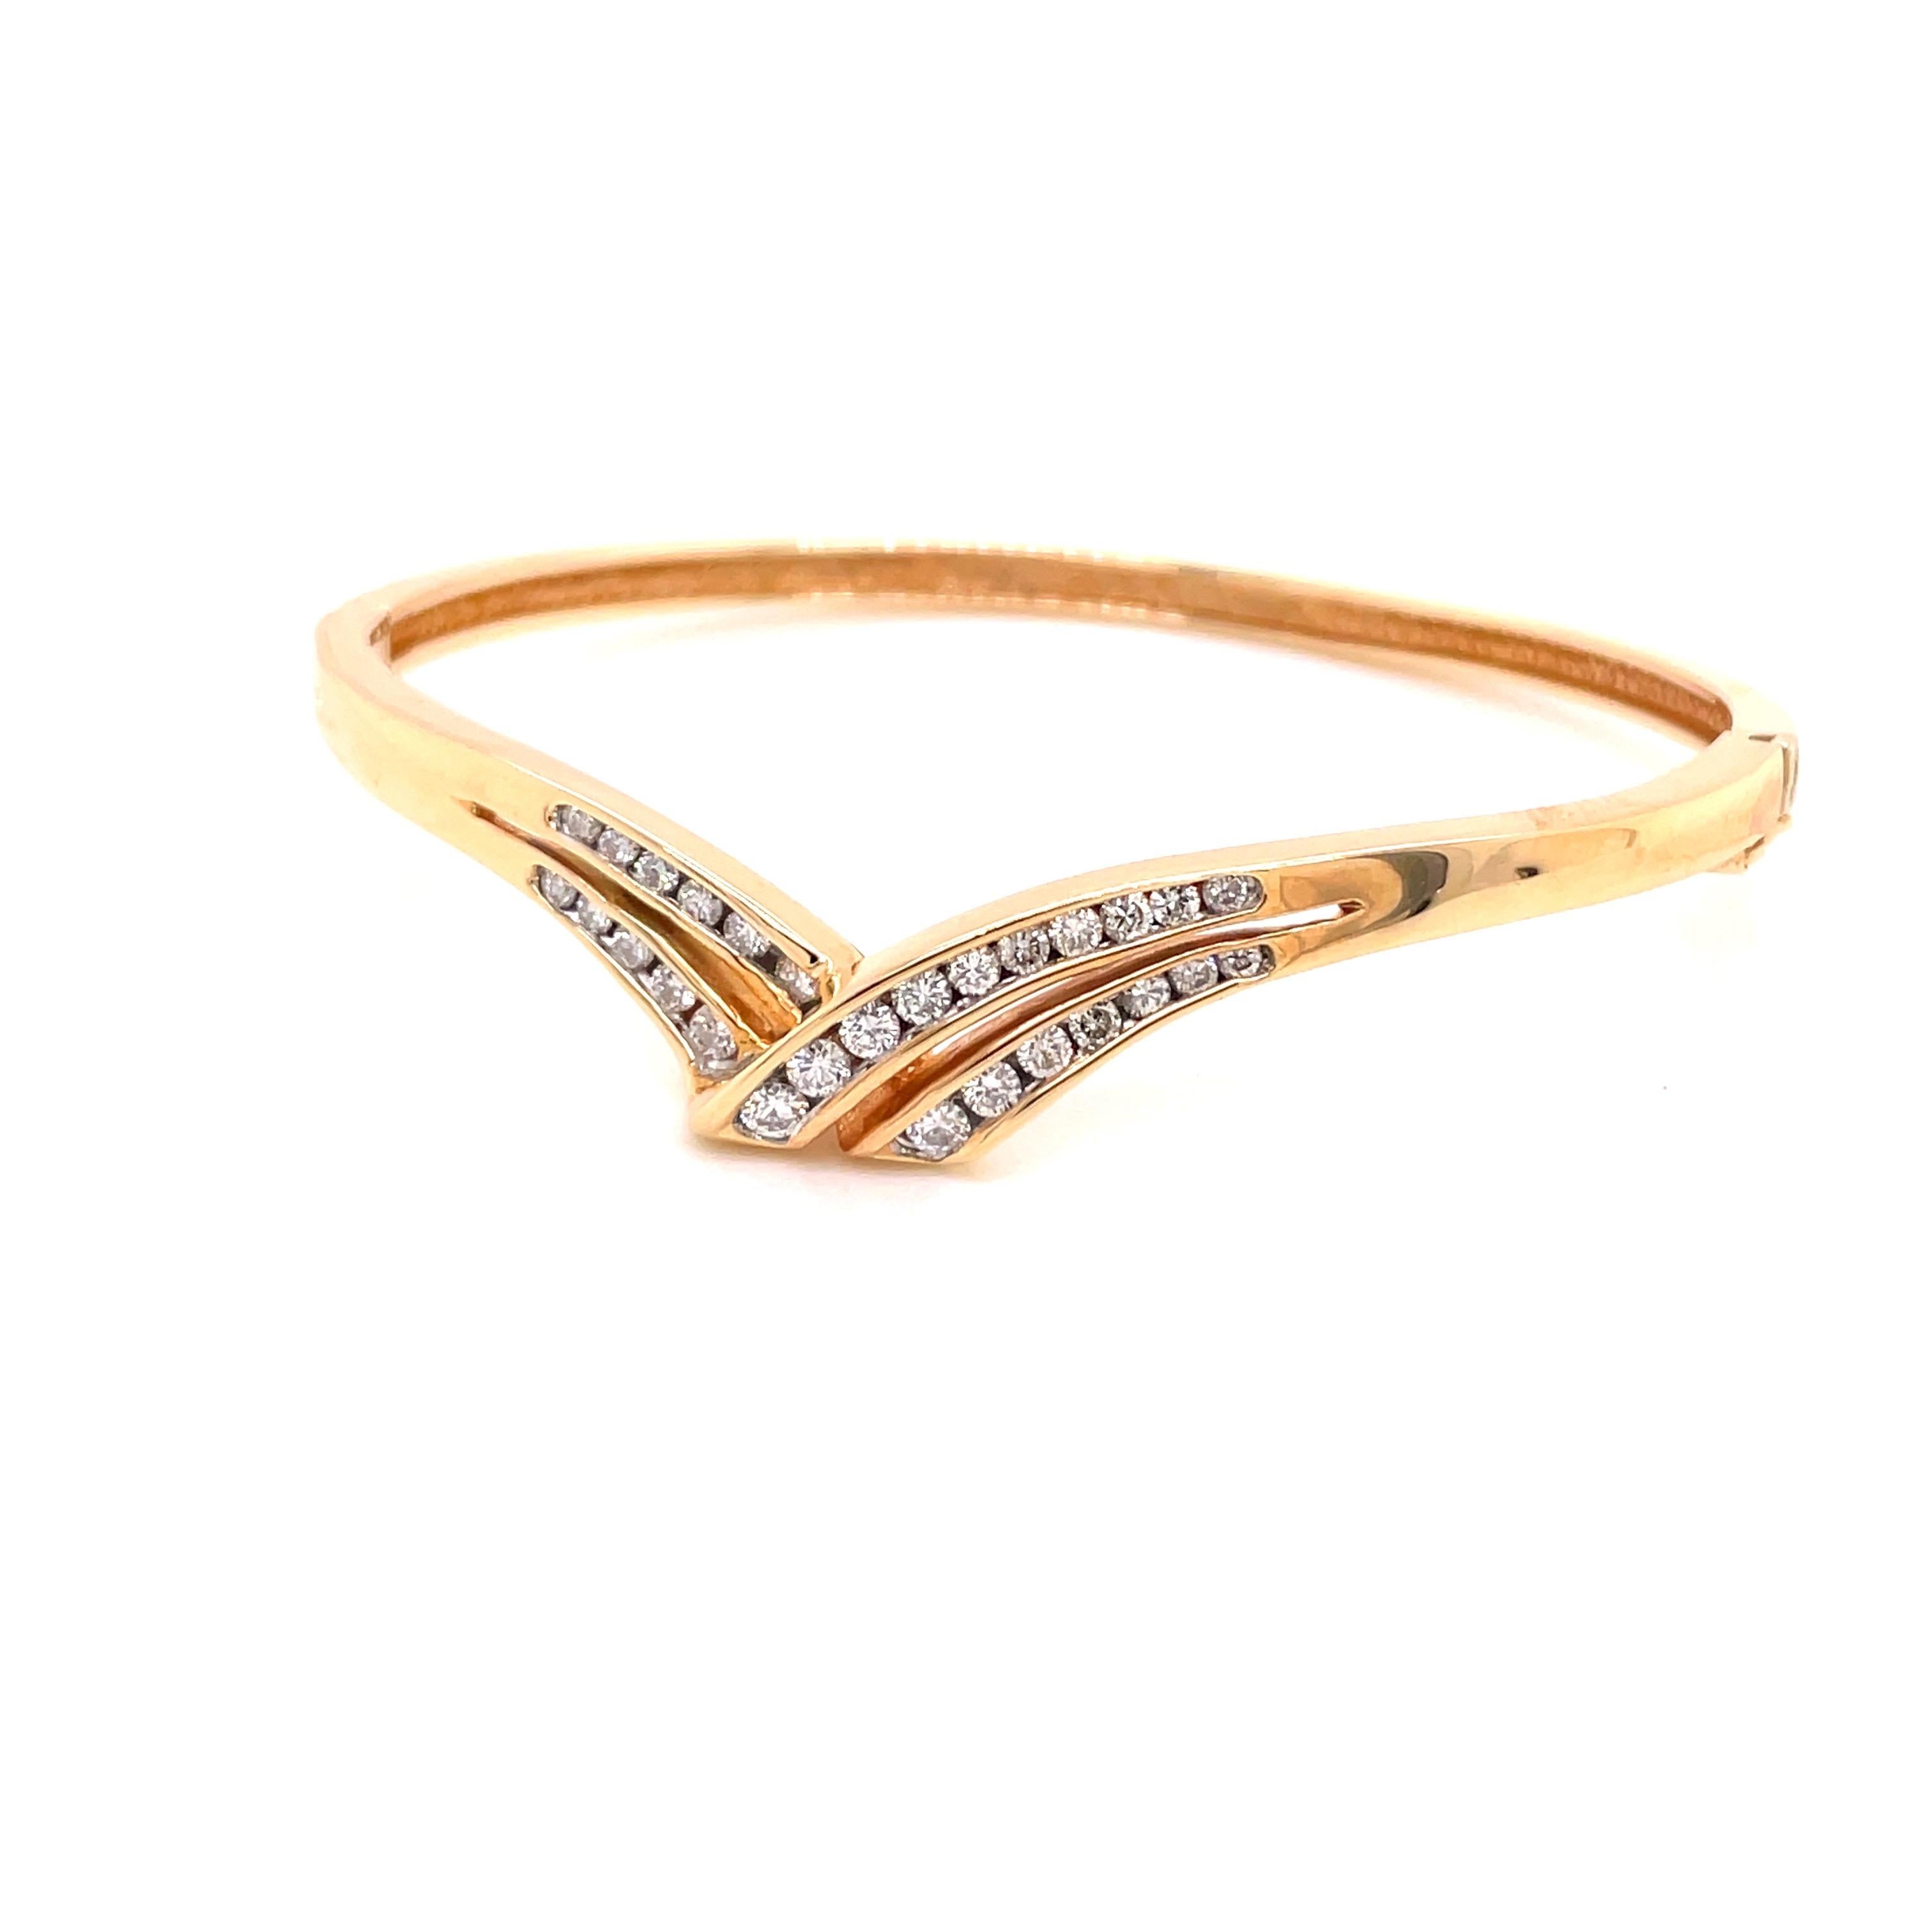 14K Yellow Gold Diamond Bangle Bracelet .87ct - The bangle has channel set 28 round brilliant diamonds weighing .87ct with G - H color and SI clarity. The width of the bangle on top is 8mm and tapers to 3.3mm on the bottom. The ribbon design extends